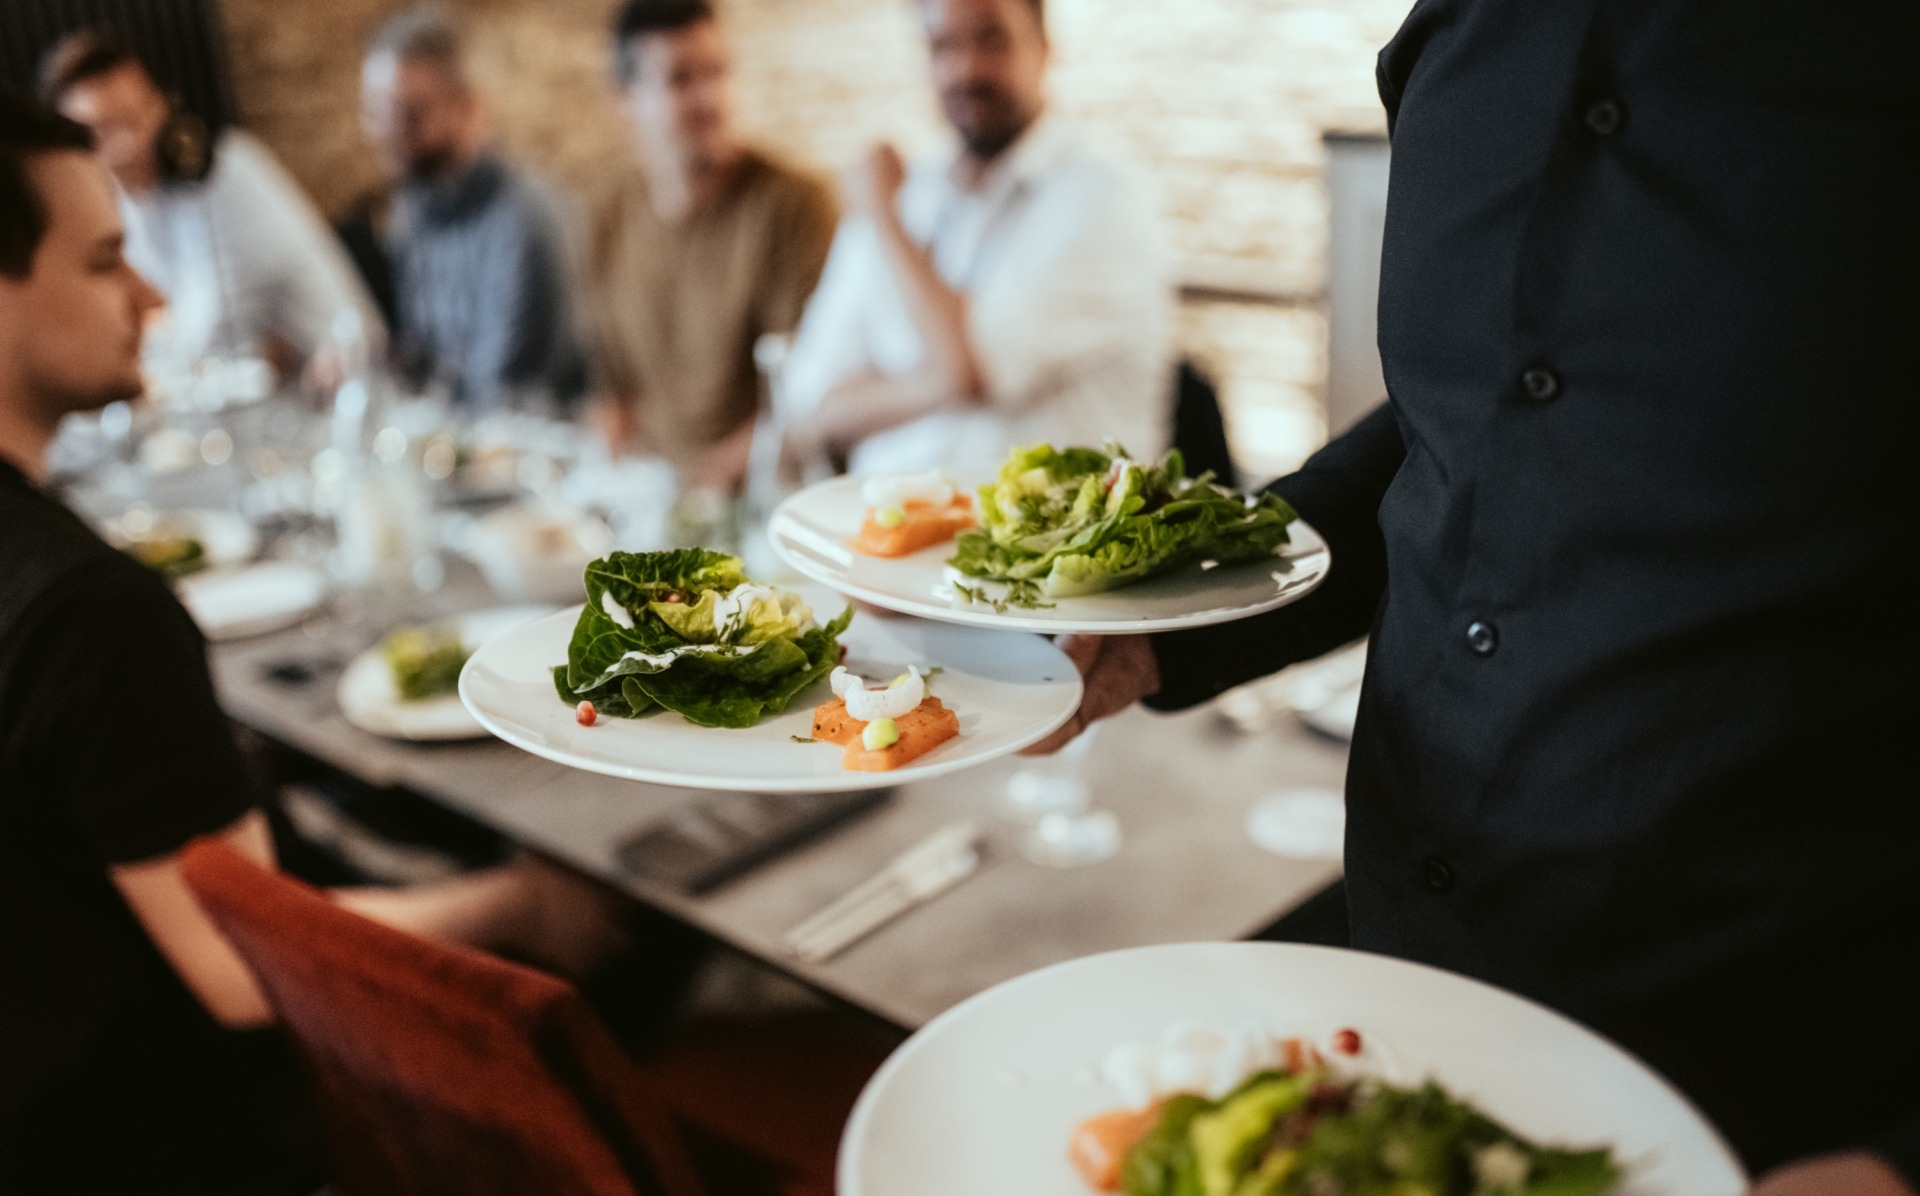 A server carries plates of salad while a group of people, buzzing with anticipation for Spryker EXCITE 2024, are seated at a dining table in the background.